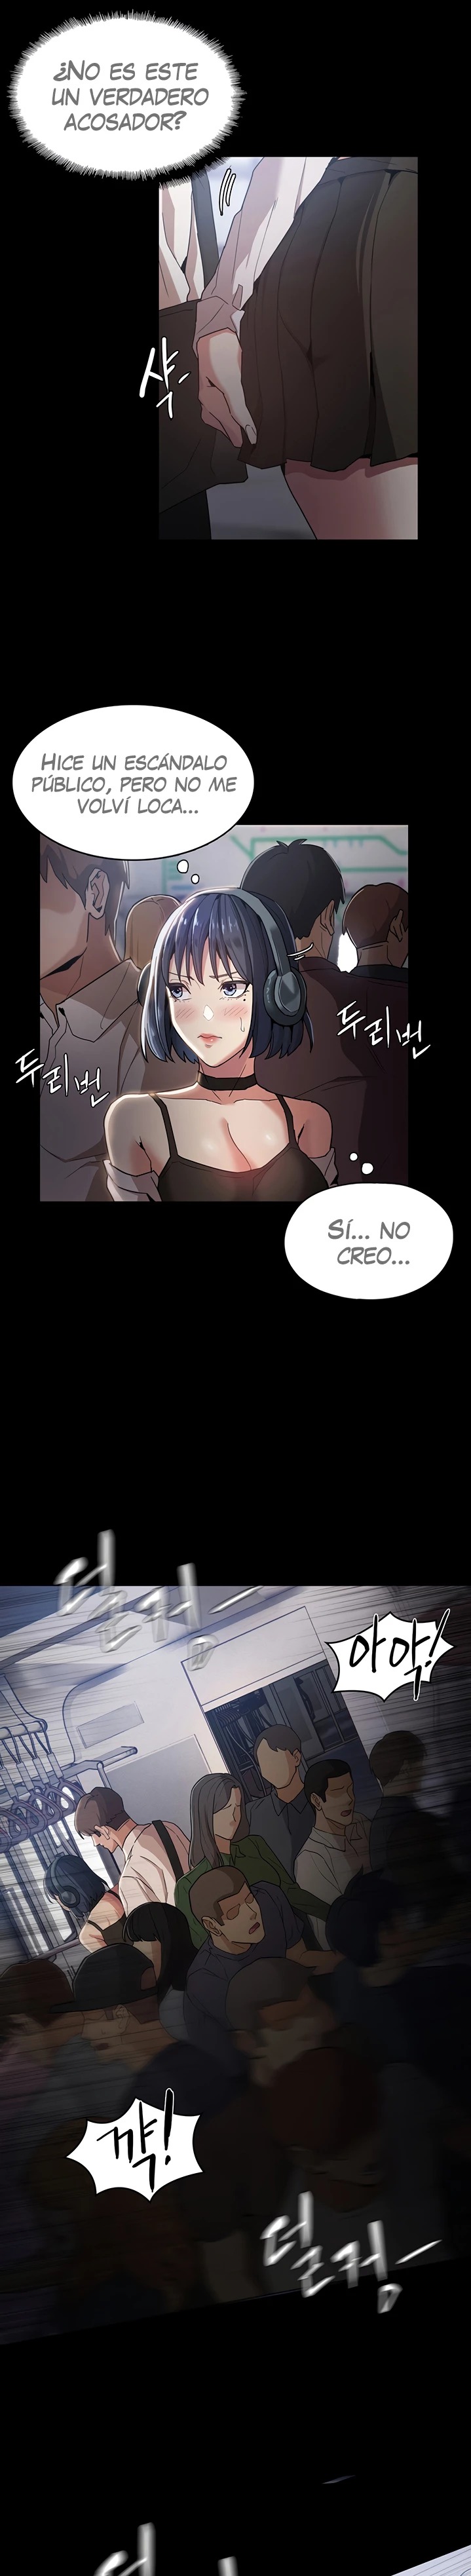 Pervert Diary Raw - Chapter 1 Page 11